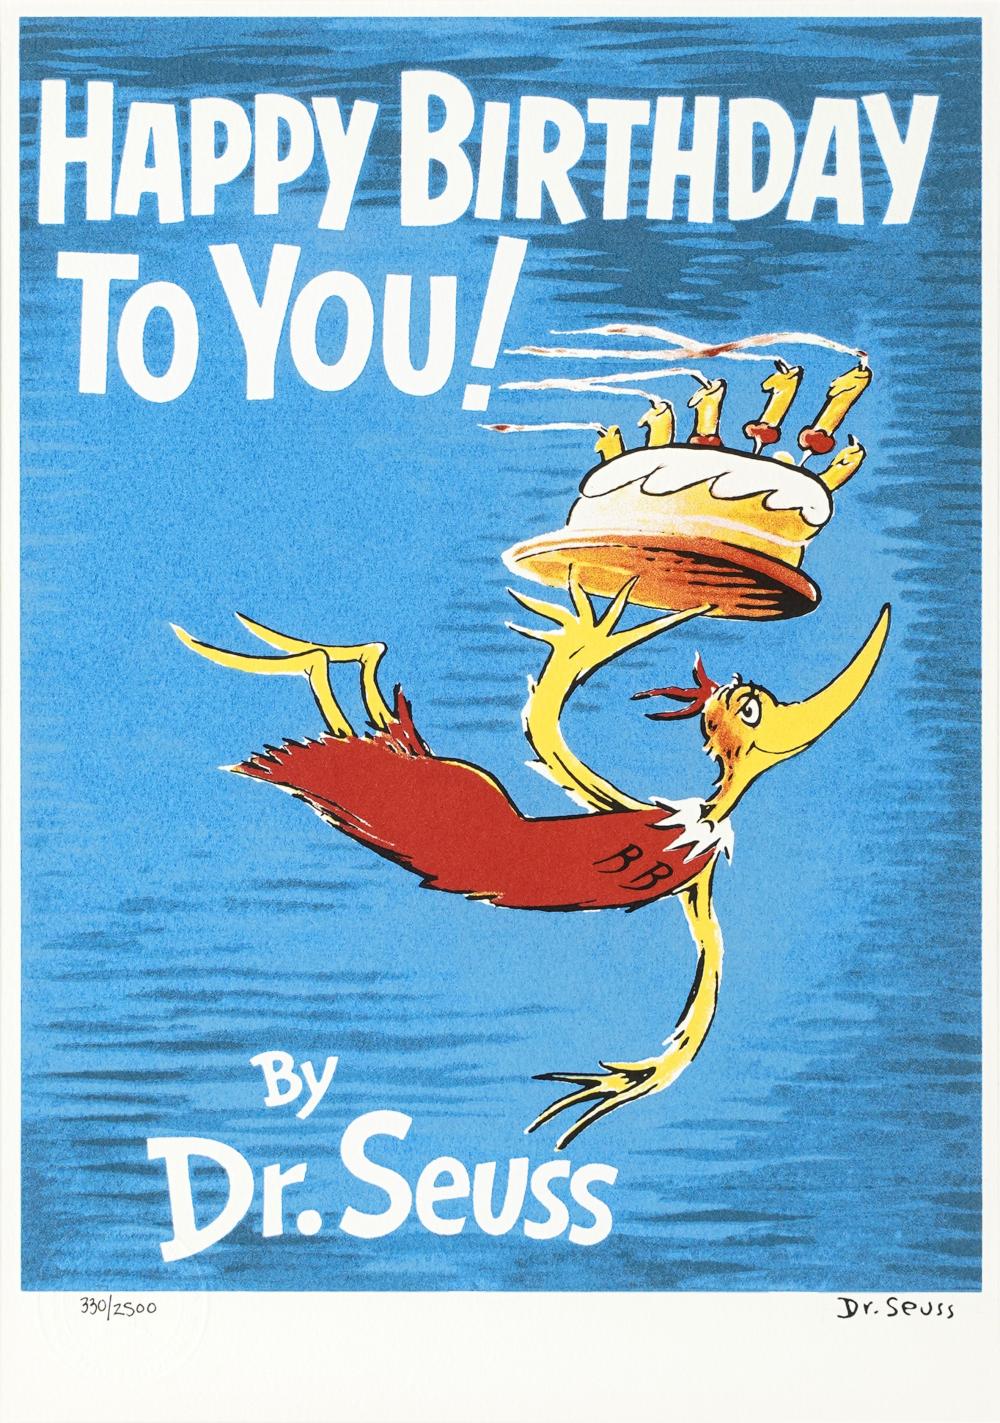 DR. SEUSS (THEODORE S GIESEL):